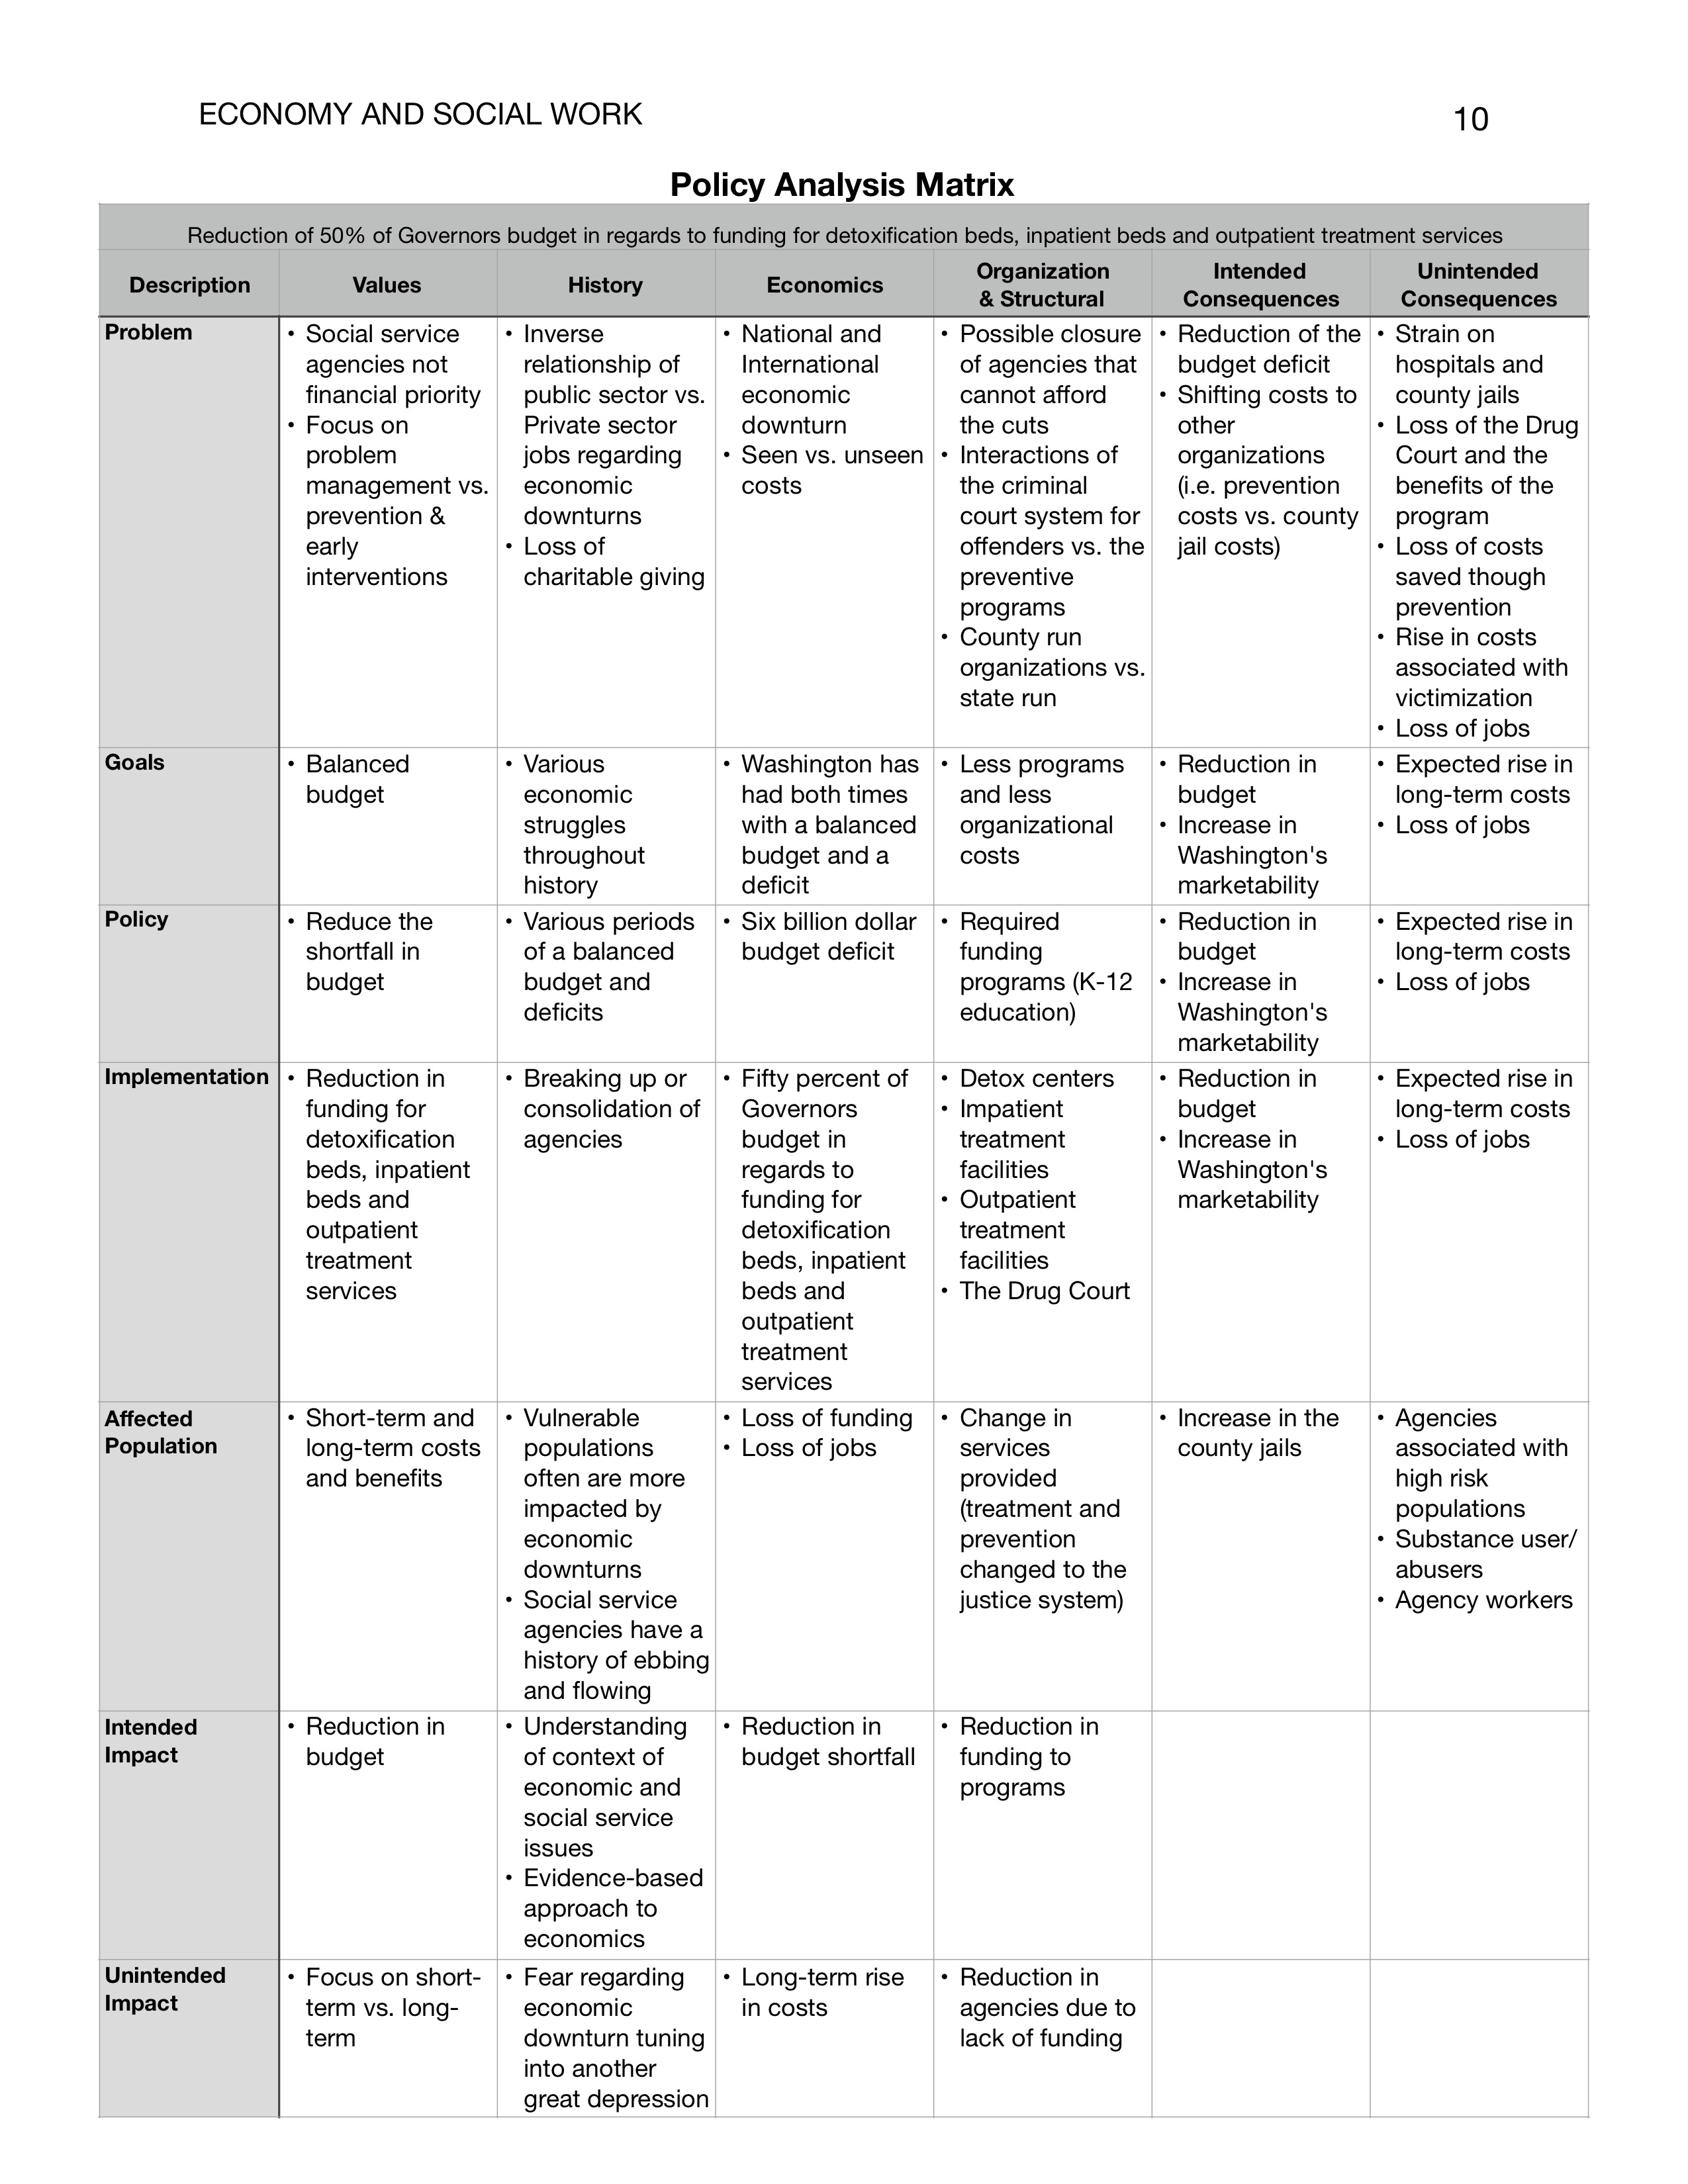  A table demonstrating an example of a policy analysis matrix 